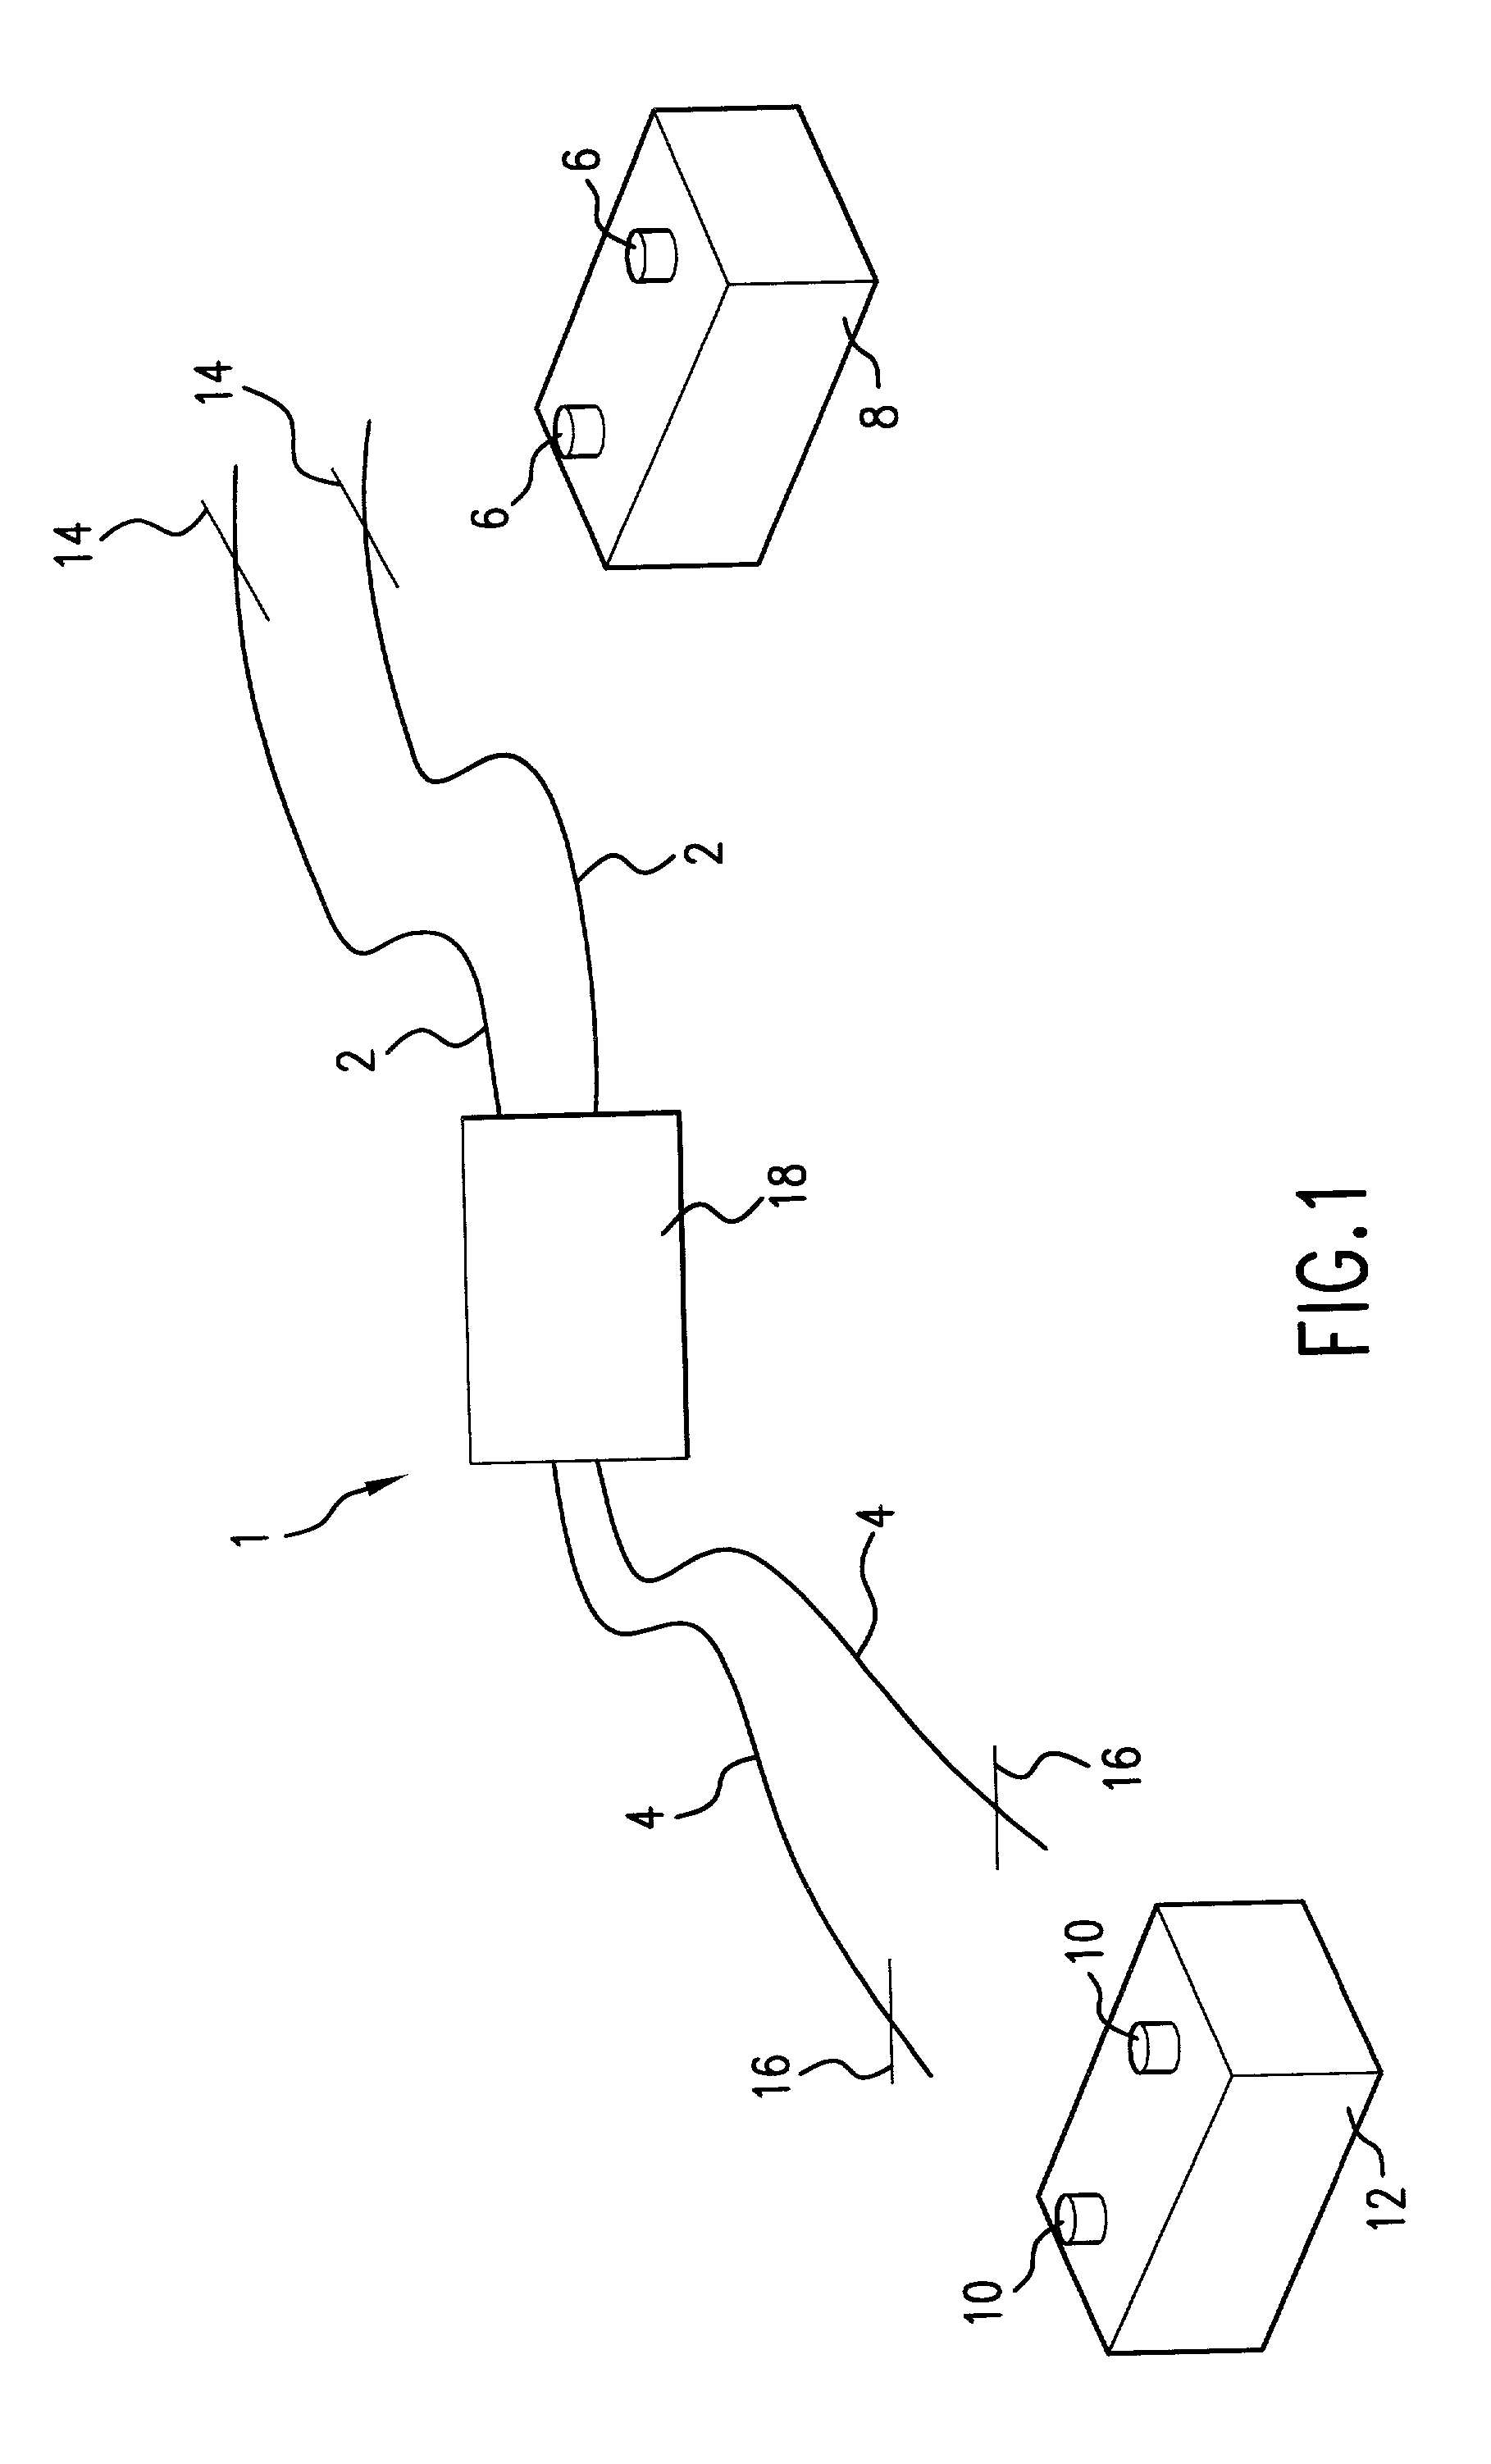 Battery jumper cable connection apparatus and methods